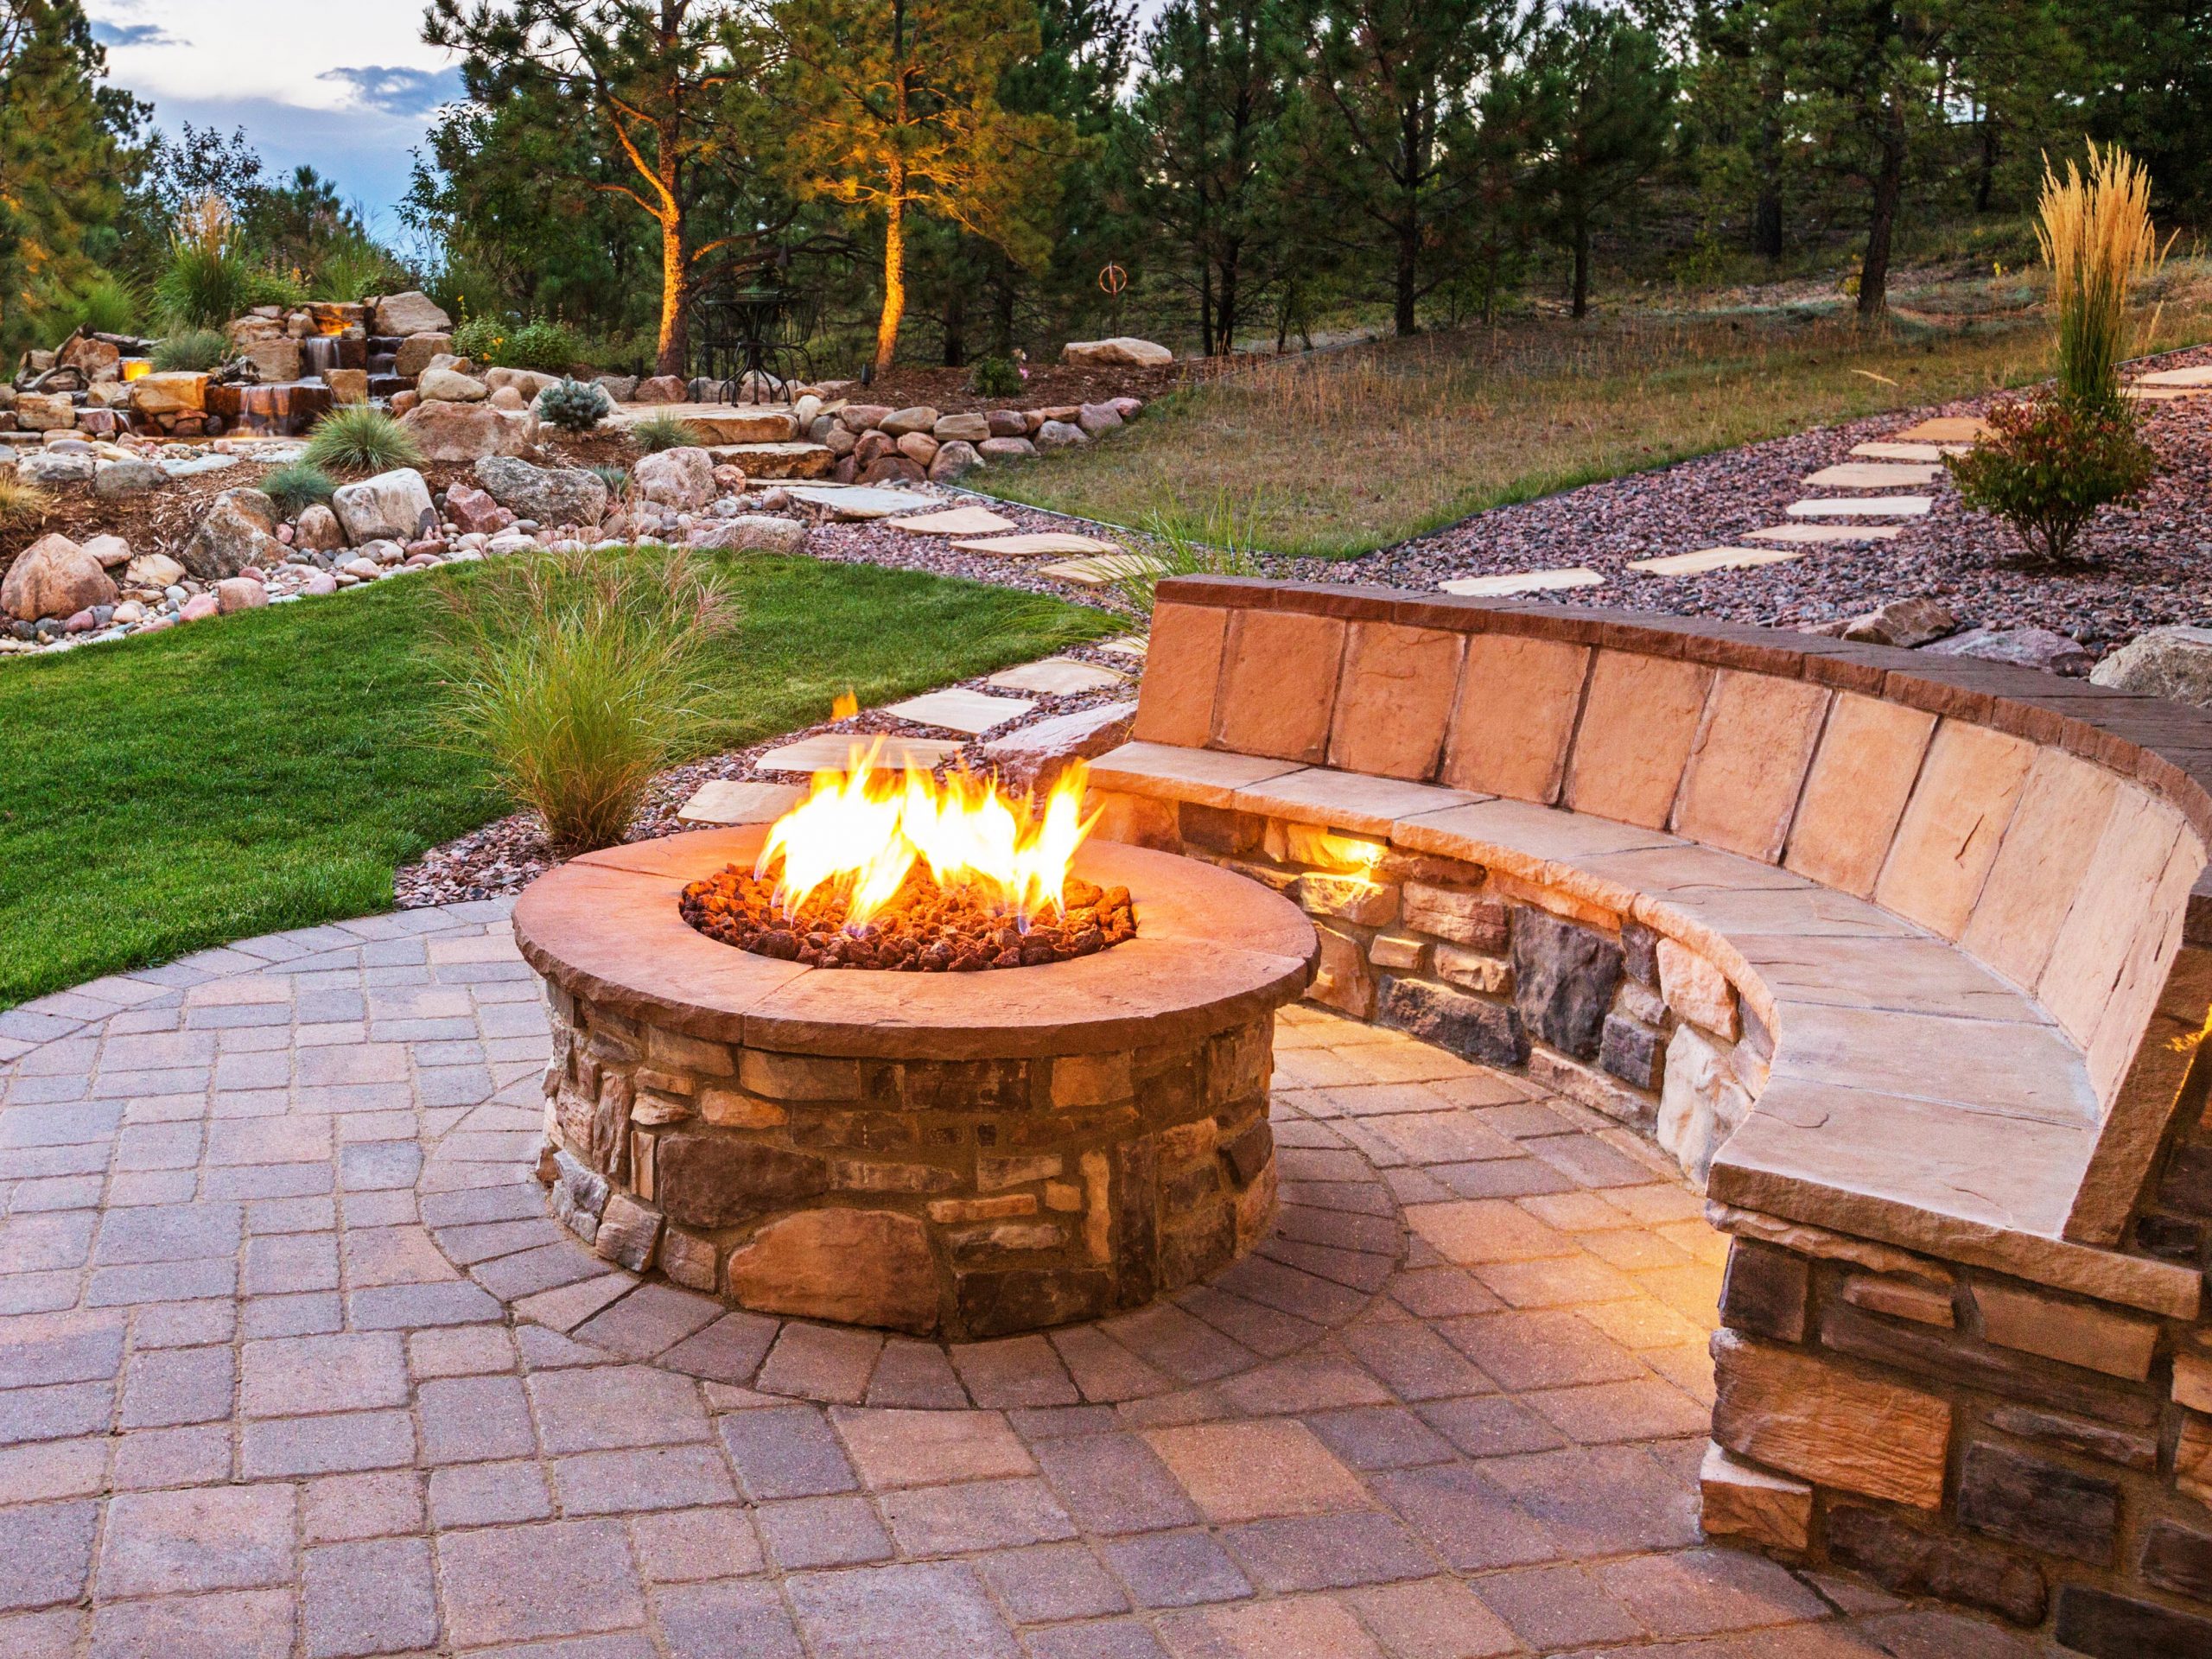 Outdoor fire pit next to built in bench